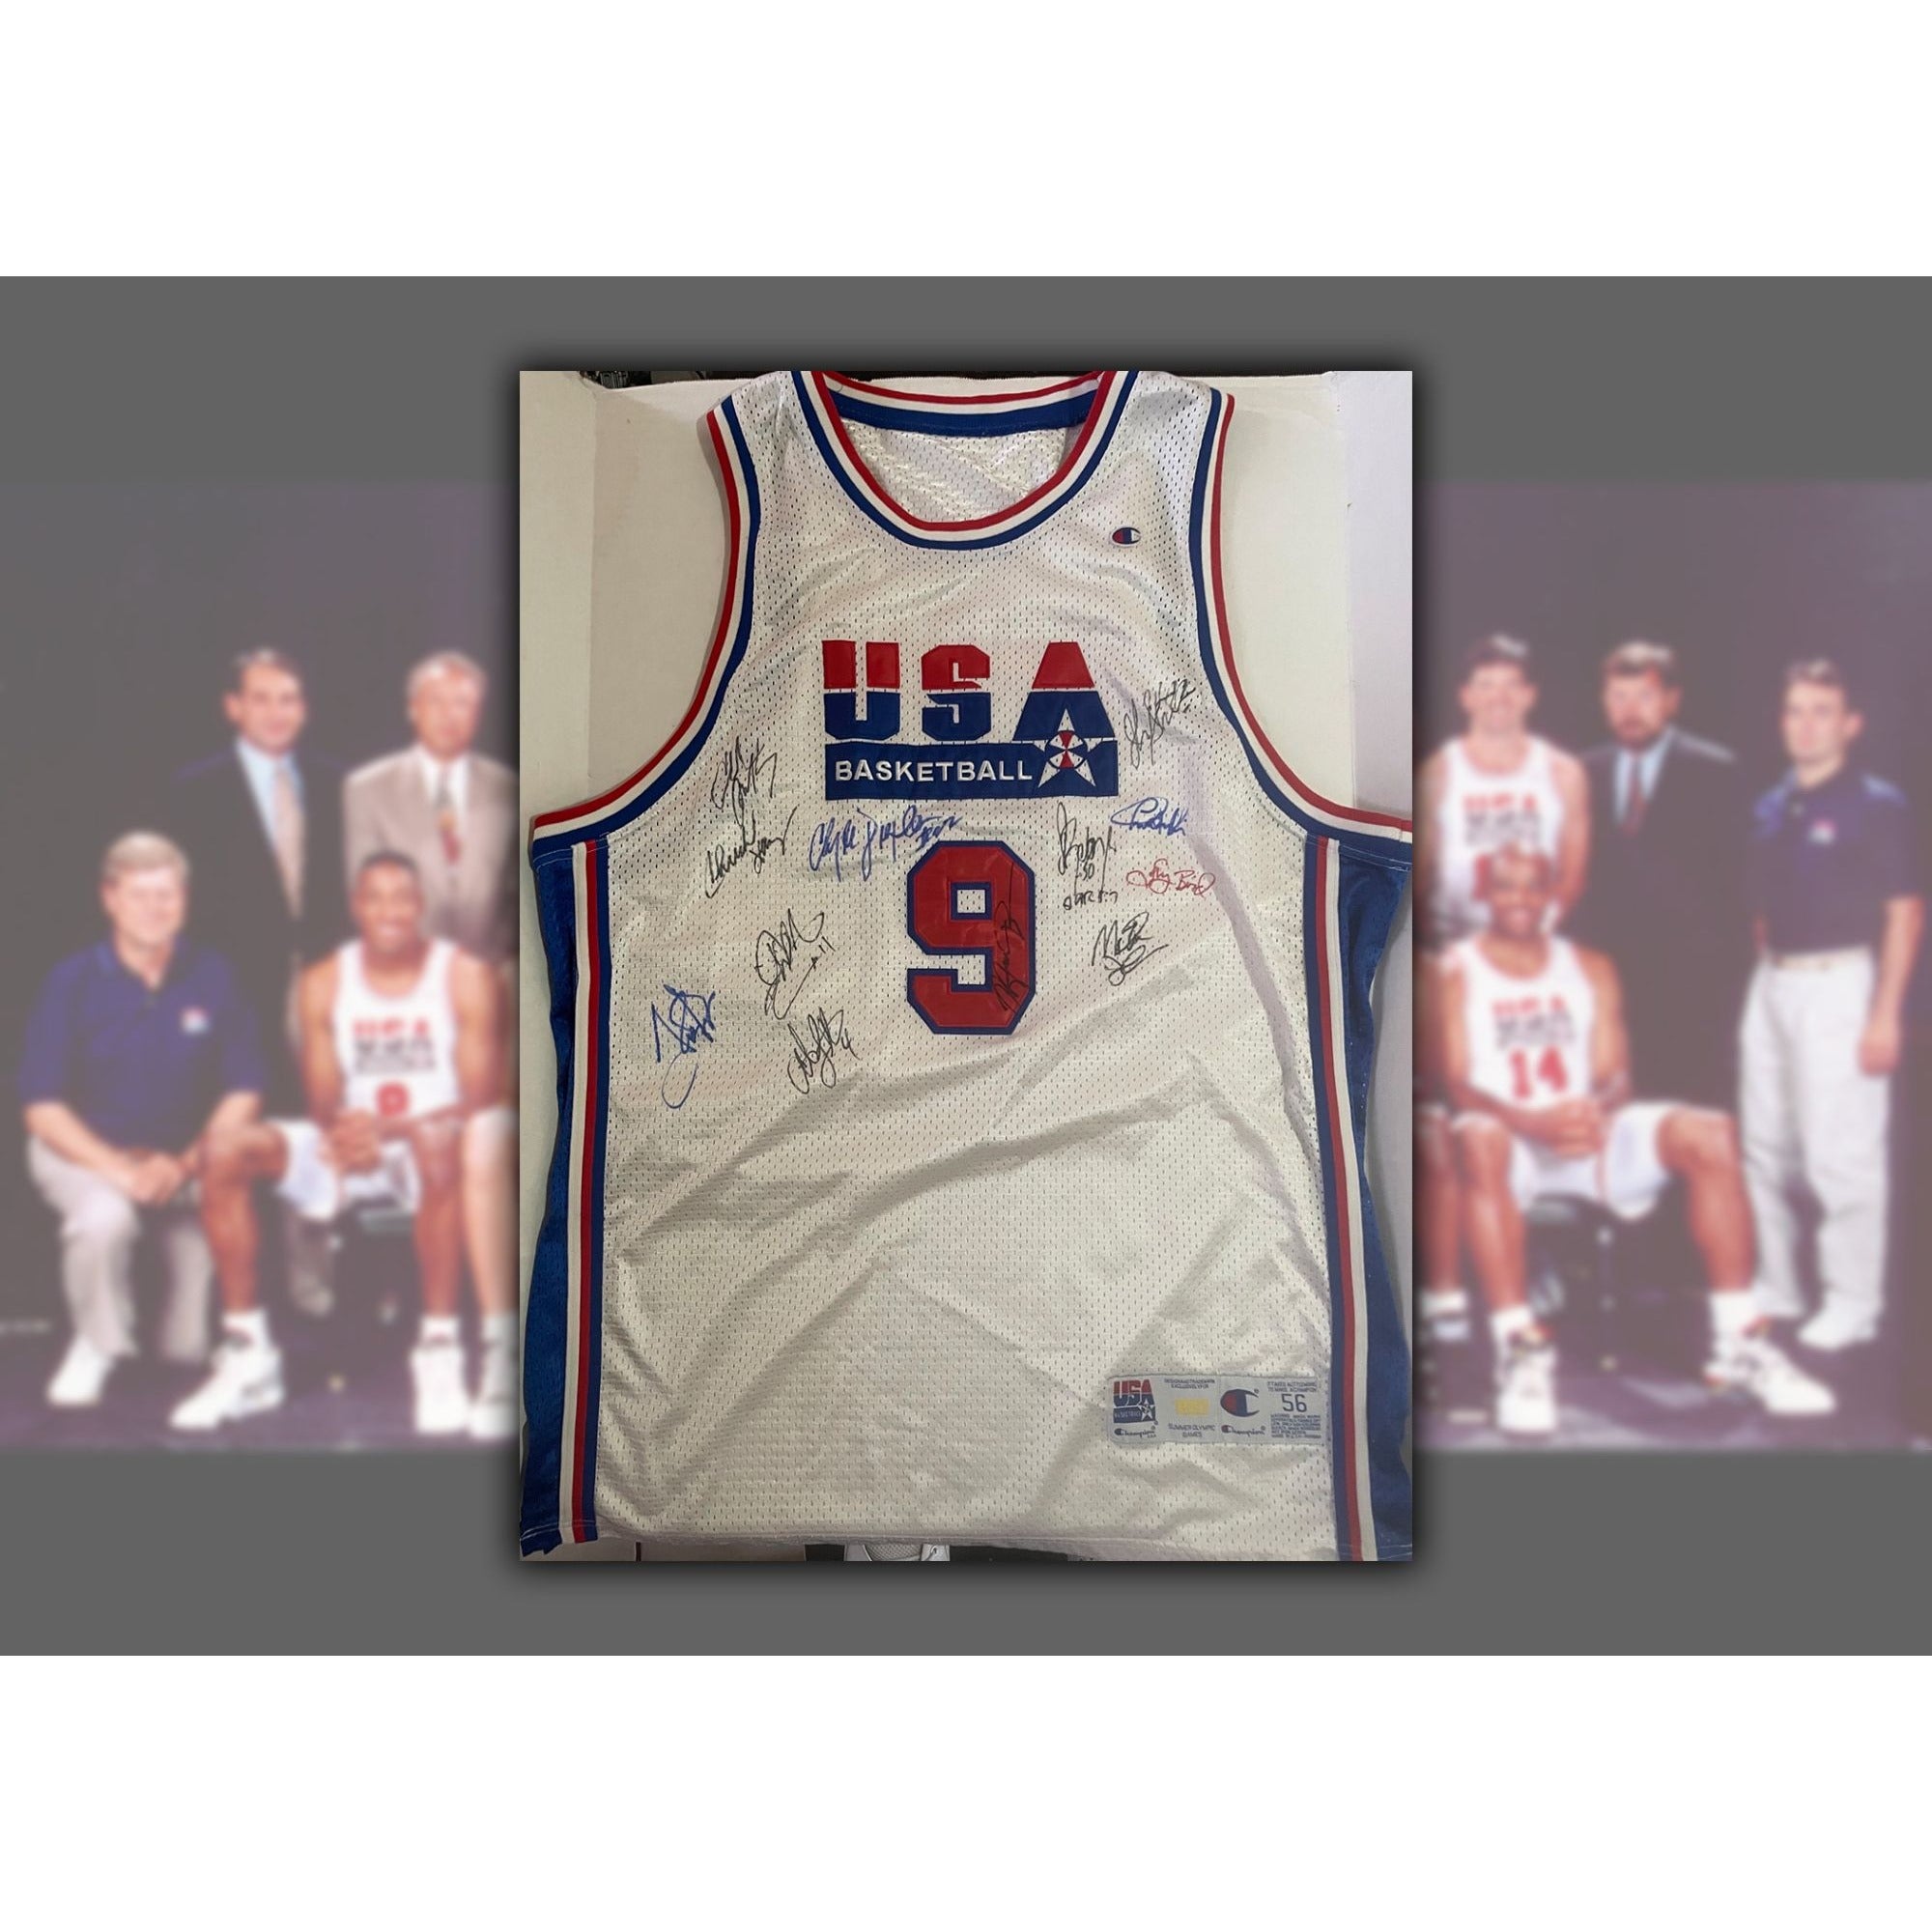 1992 USA Basketball the Dream Team signed jersey Michael Jordan, Scottie Pippen, Karl Malone, Chuck Daly, Magic Johnson signed  with proof